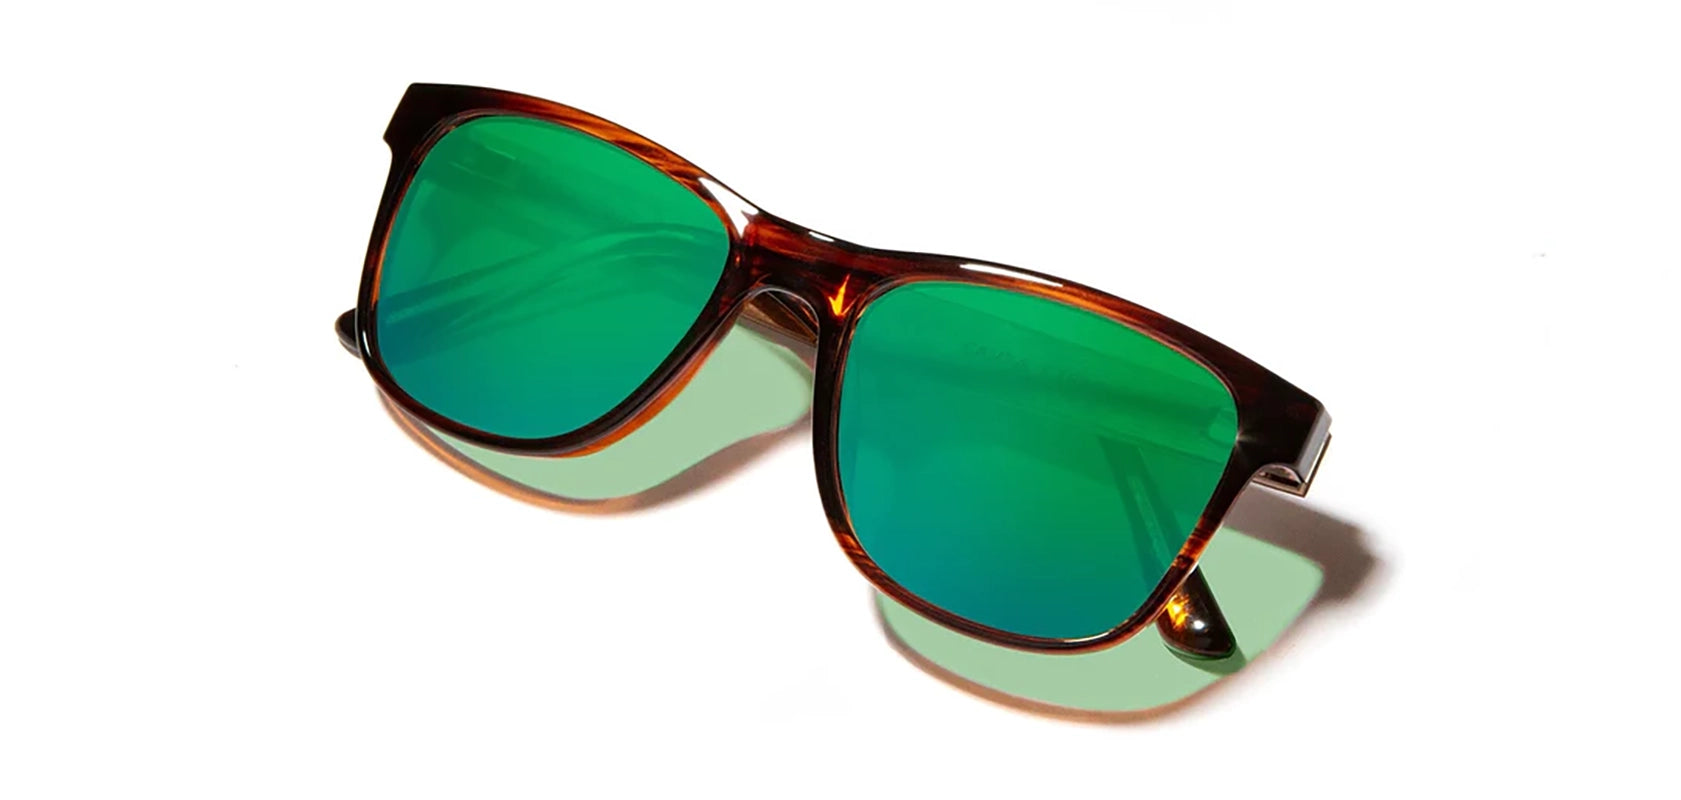 Camp trail Sunglasses with Tortoise/Walnut Frames and HD+ Green Flash Polarized lenses, front angled folded temple  view